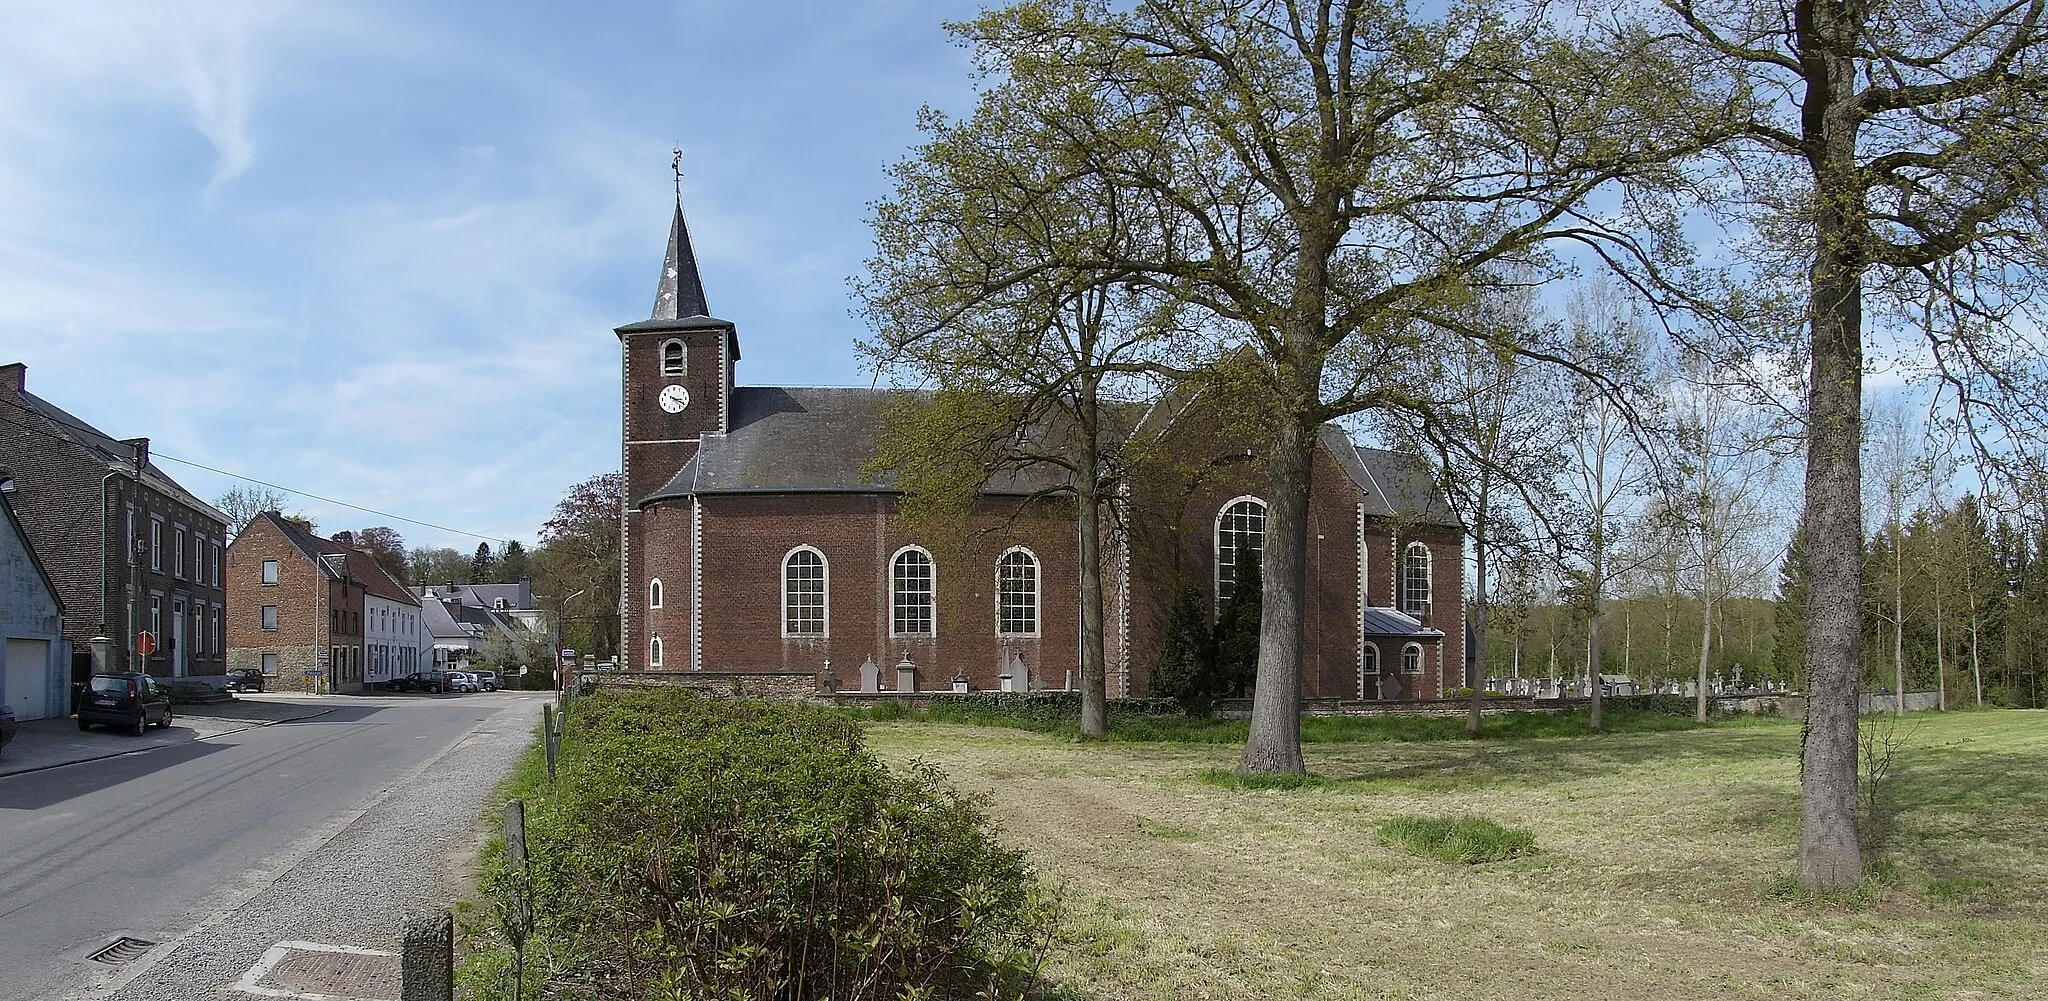 Photo showing: Church "Saint Jean Baptiste" in Nethen (Grez-Doiceau)

Camera location 50° 47′ 00.4″ N, 4° 40′ 28.4″ E View this and other nearby images on: OpenStreetMap 50.783444;    4.674556 |scale:6000_heading:NW